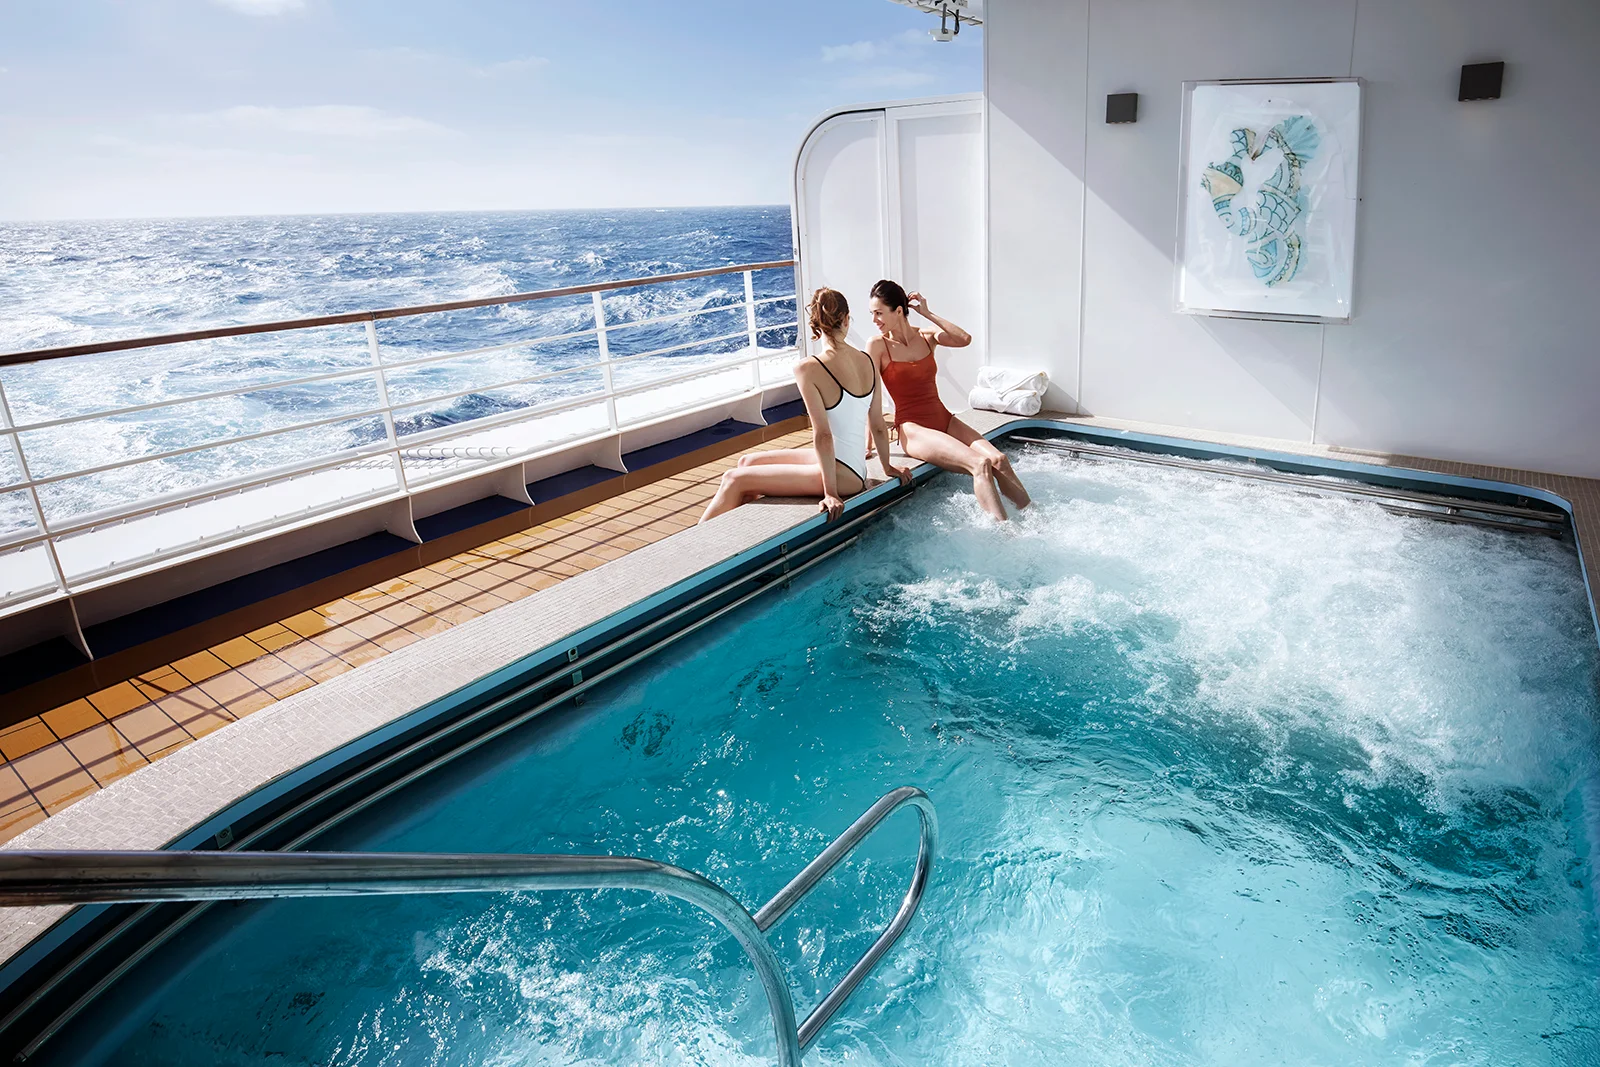 The top ten cruises for couples looking for romance and quality time together at sea